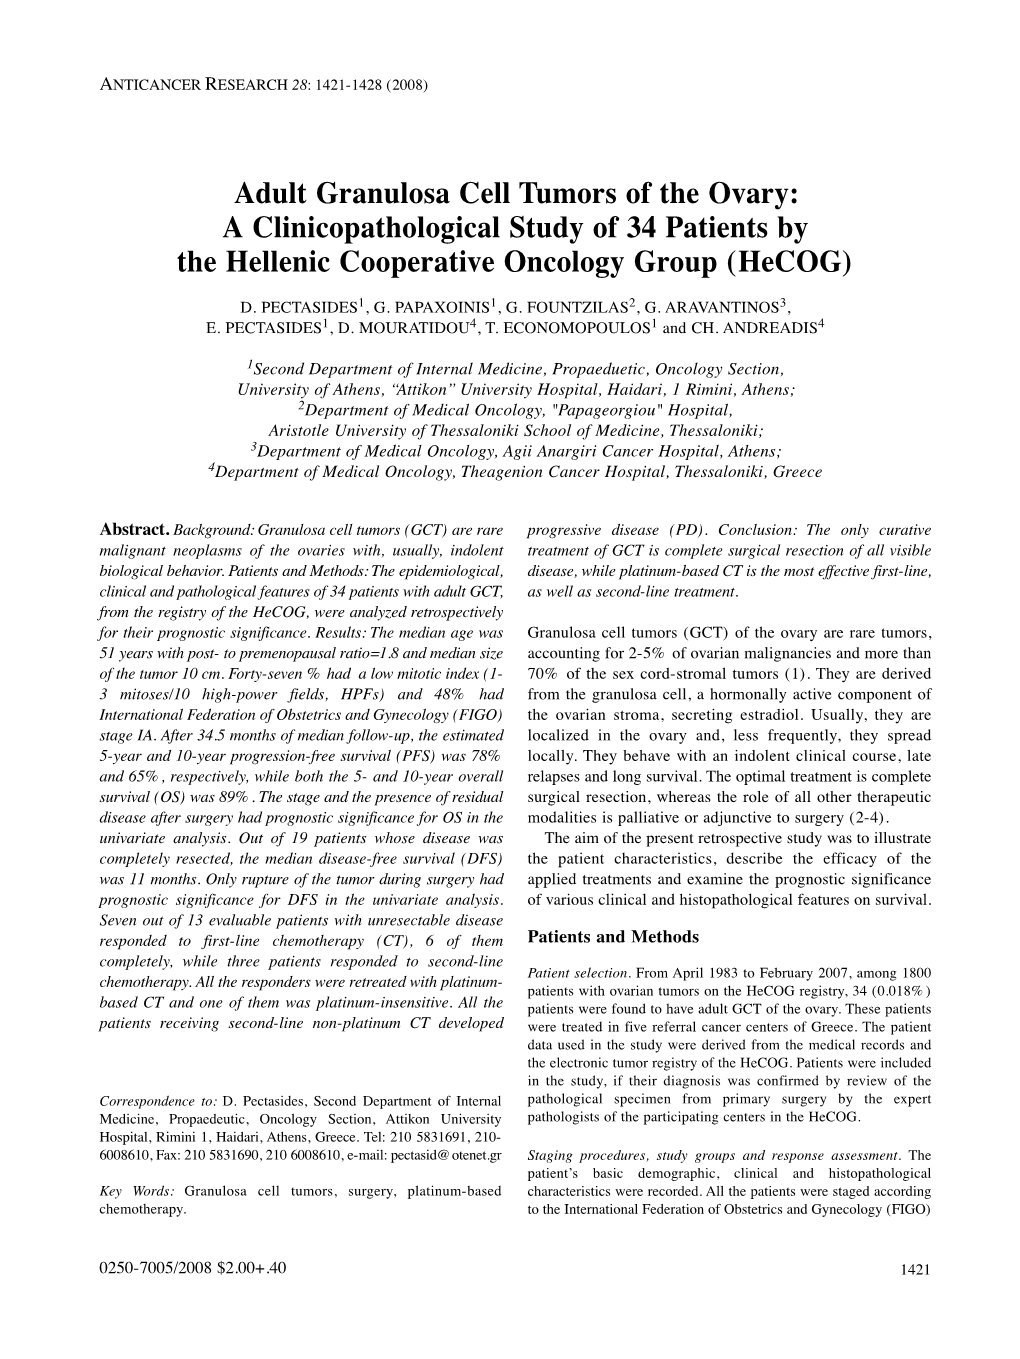 Adult Granulosa Cell Tumors of the Ovary: a Clinicopathological Study of 34 Patients by the Hellenic Cooperative Oncology Group (Hecog) D